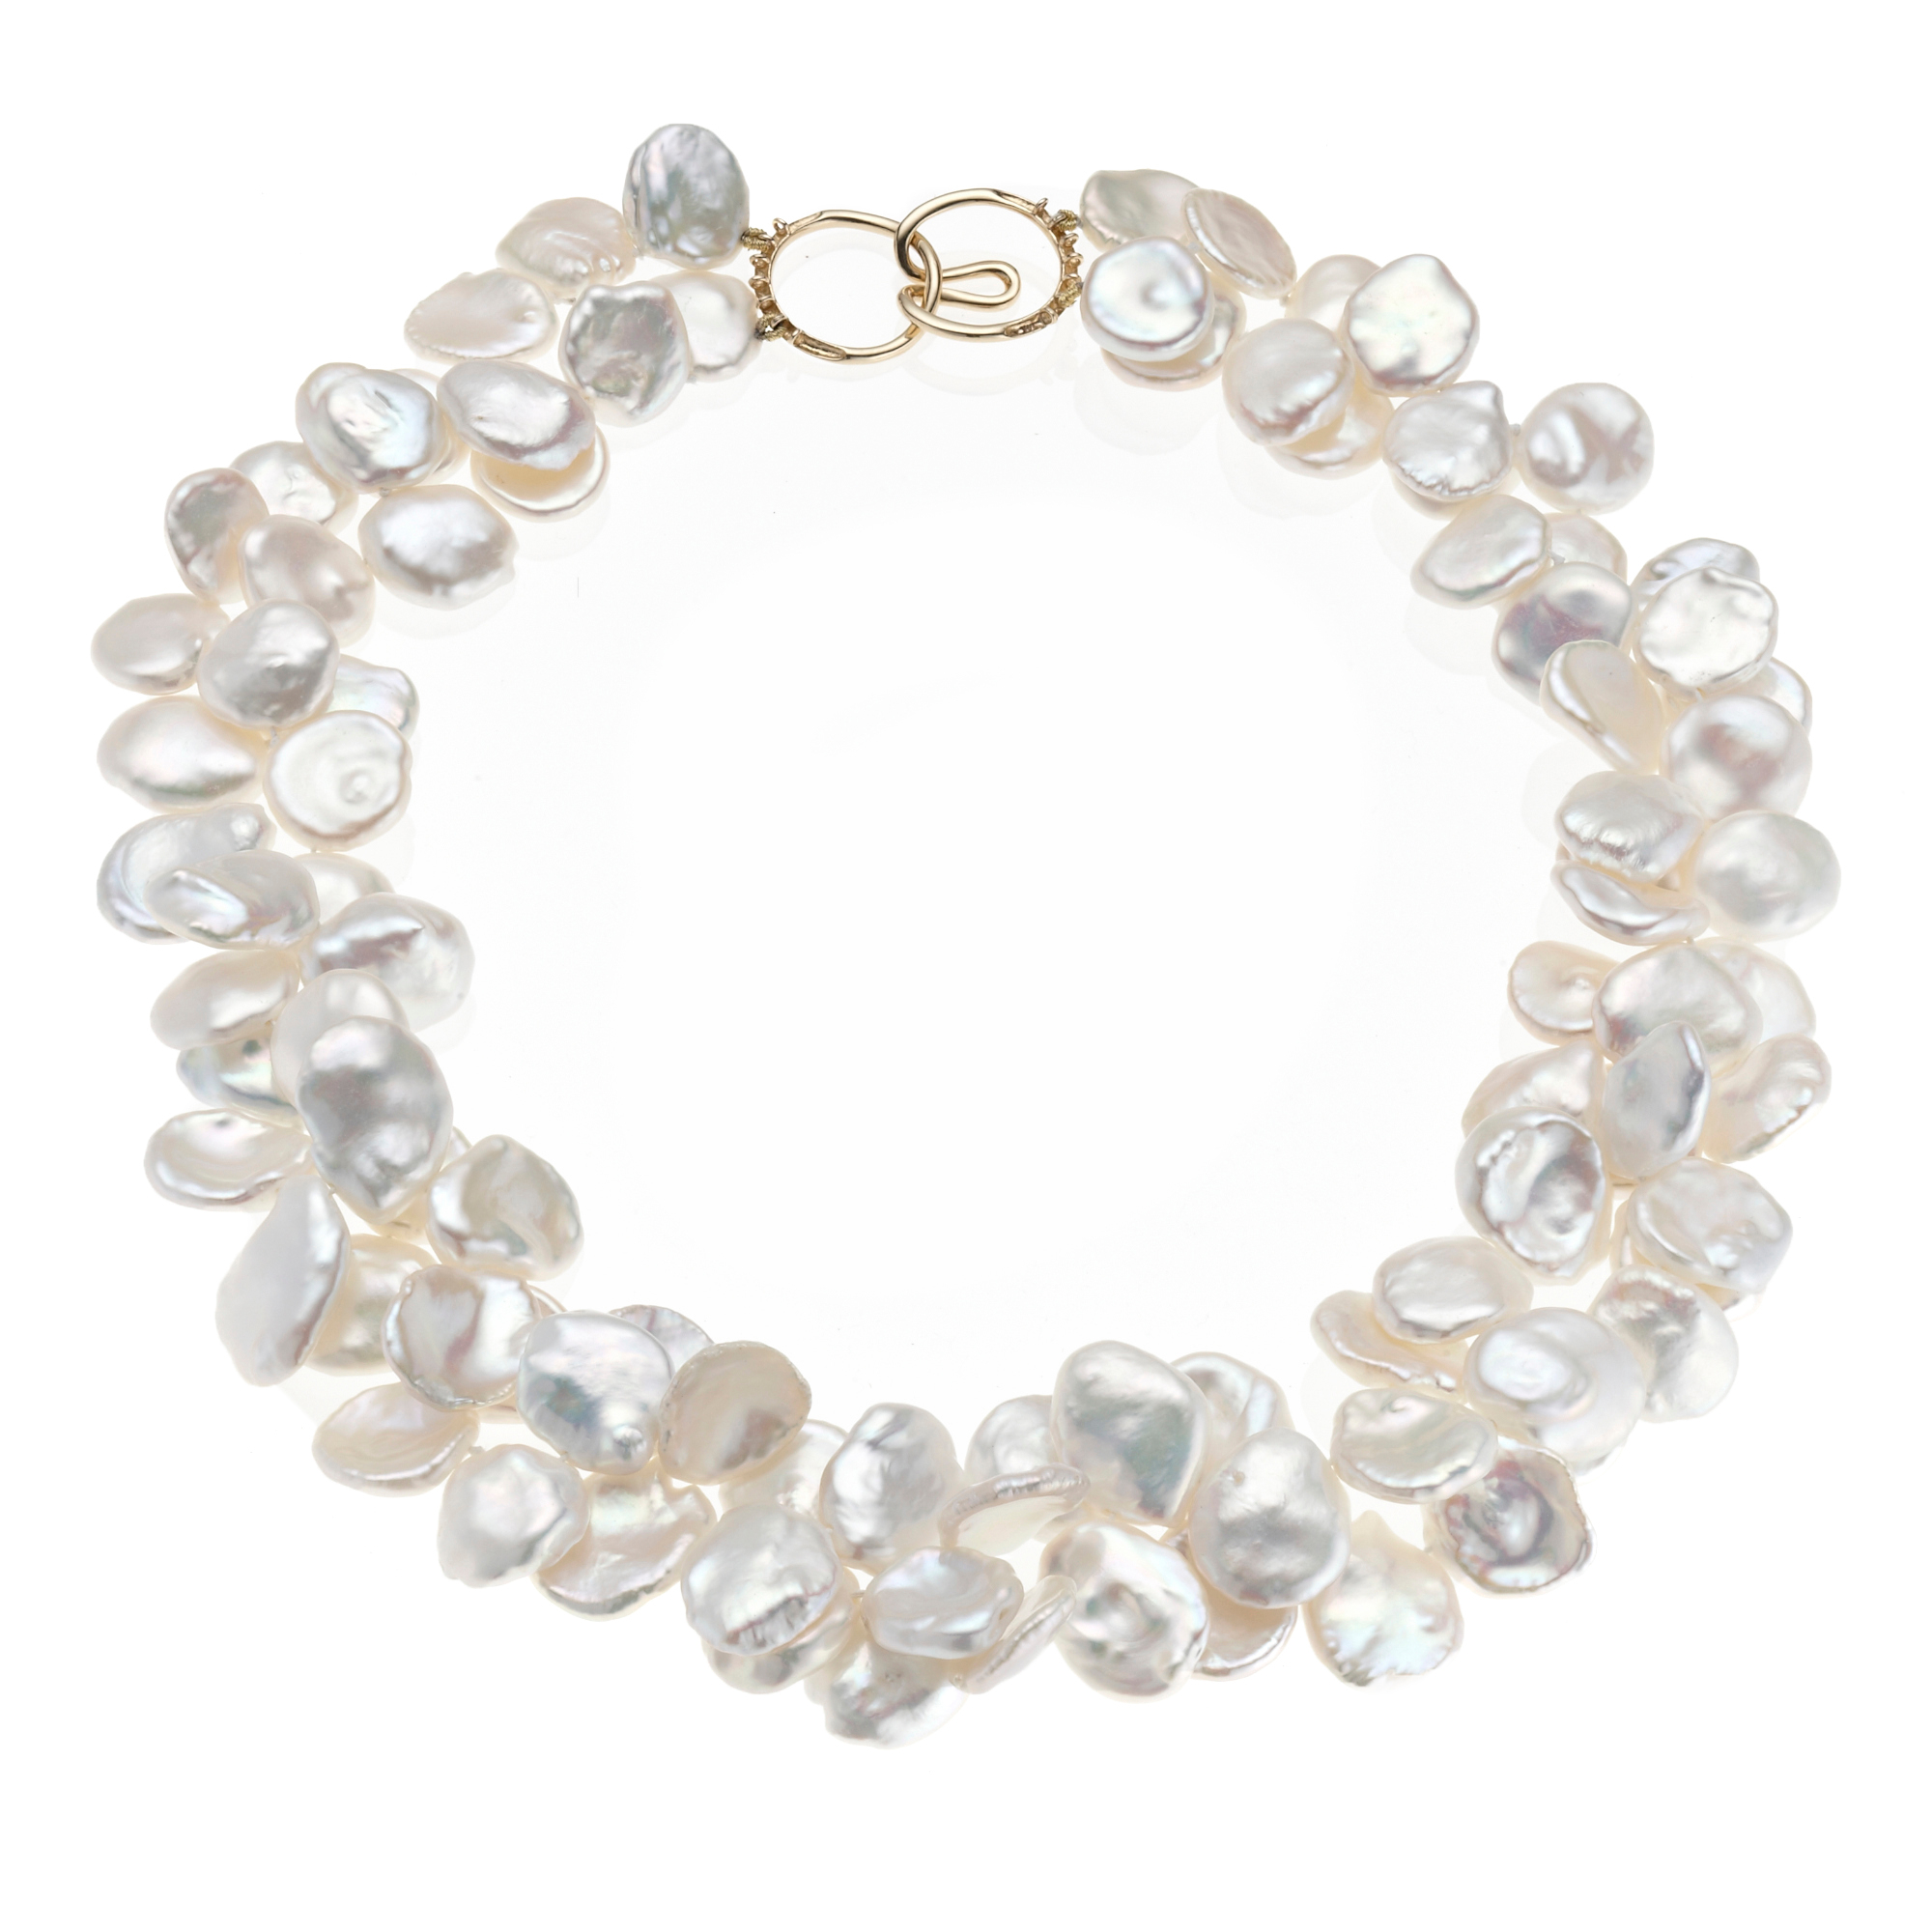 Gump's Freshwater Cultured Petal Pearl Necklace | Gump's